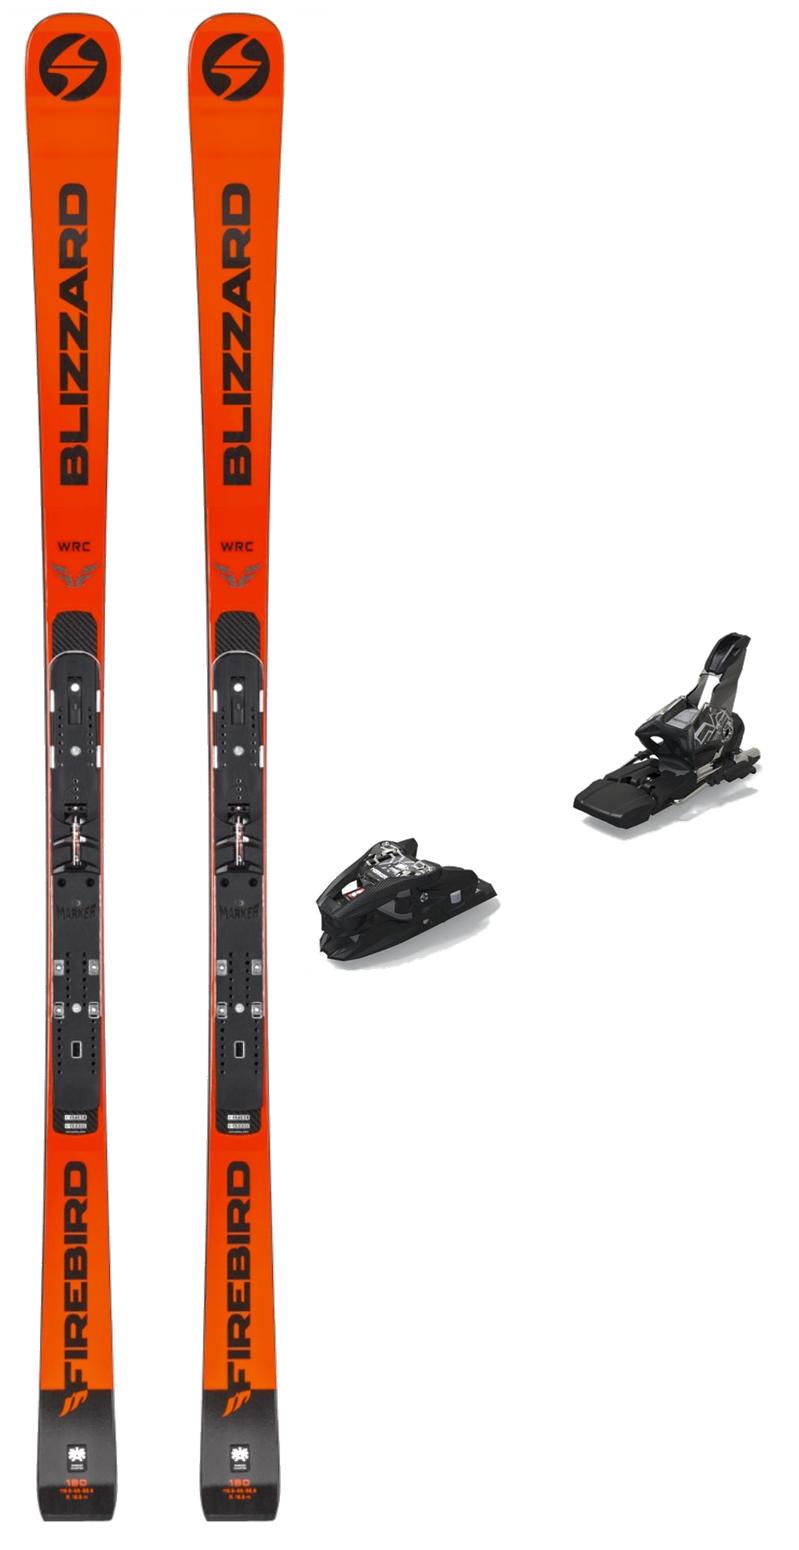 2020 Blizzard Firebird WRC WC Piston snow skis with bindings - ProSkiGuy your Hometown Ski Shop on the web